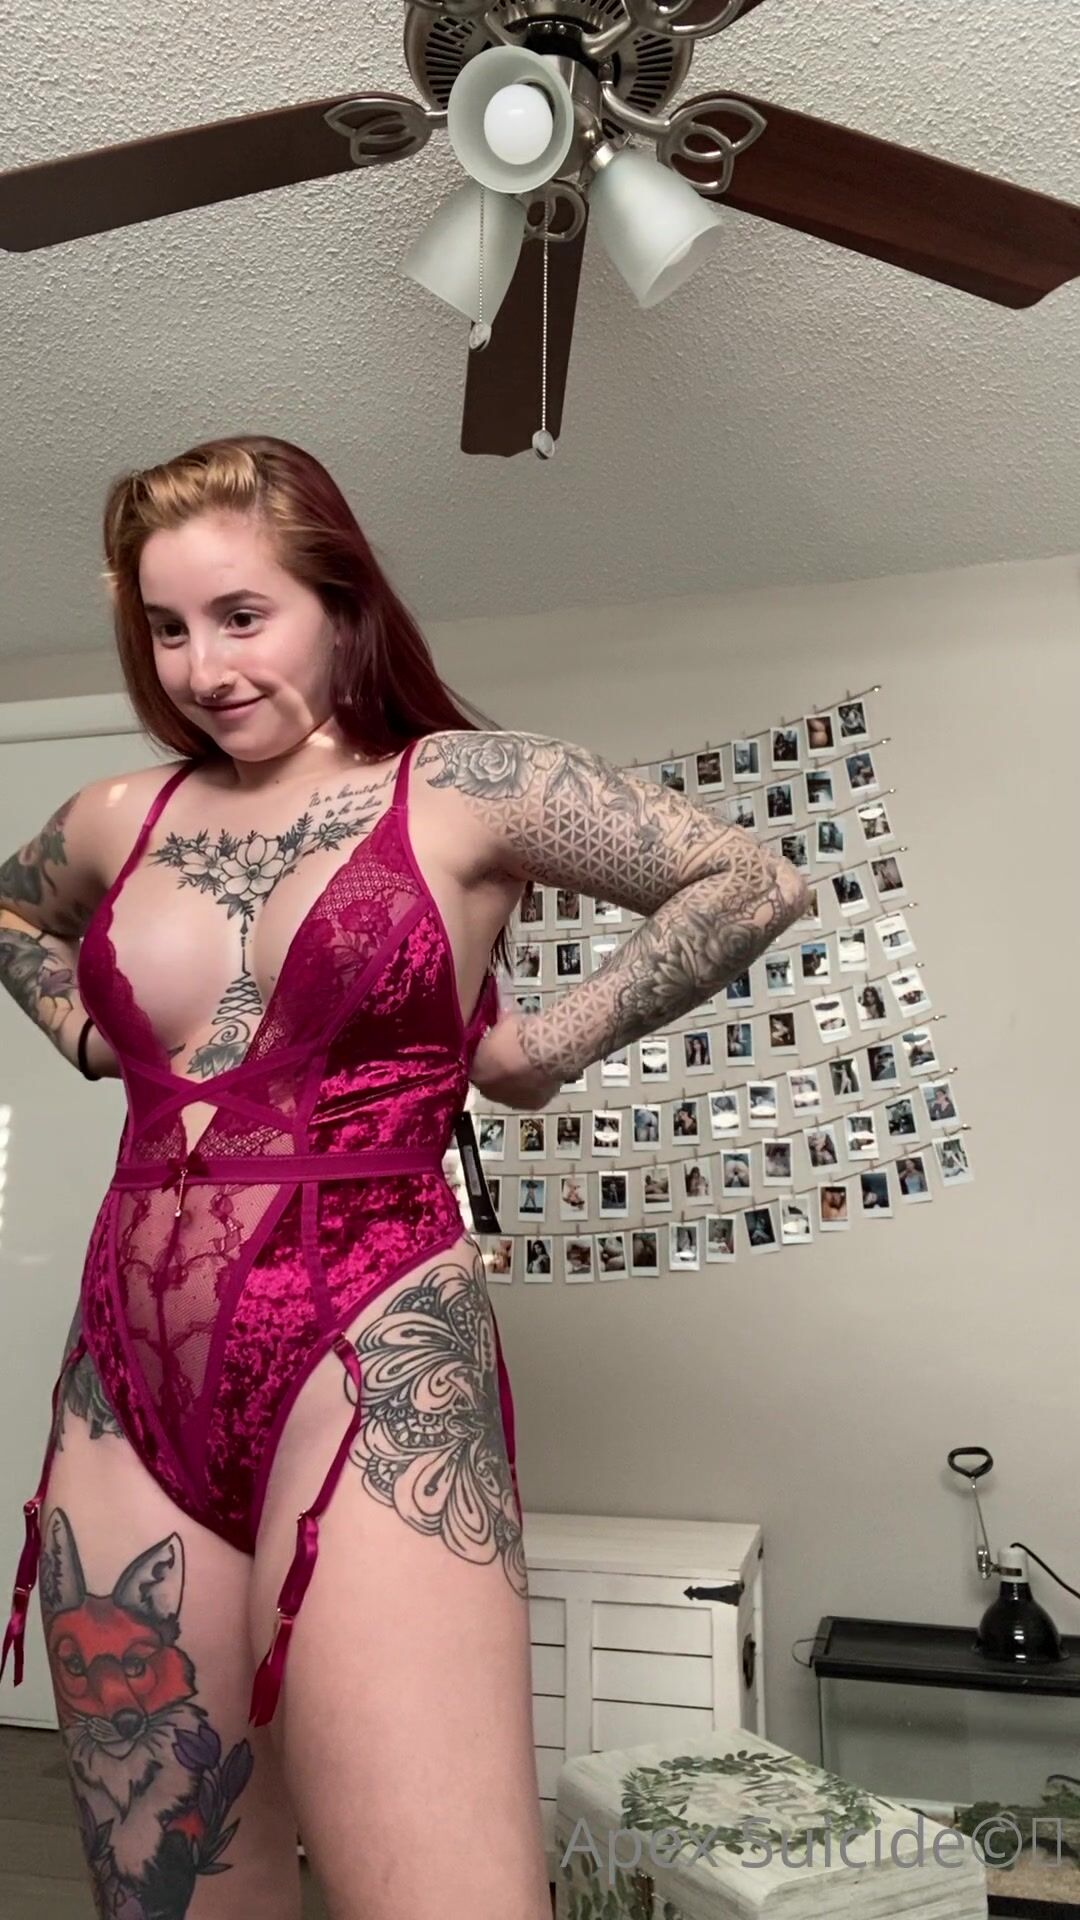 Sasha Alexandria - Trying Red Wine Lingerie / Apex Suicide Onlyfans